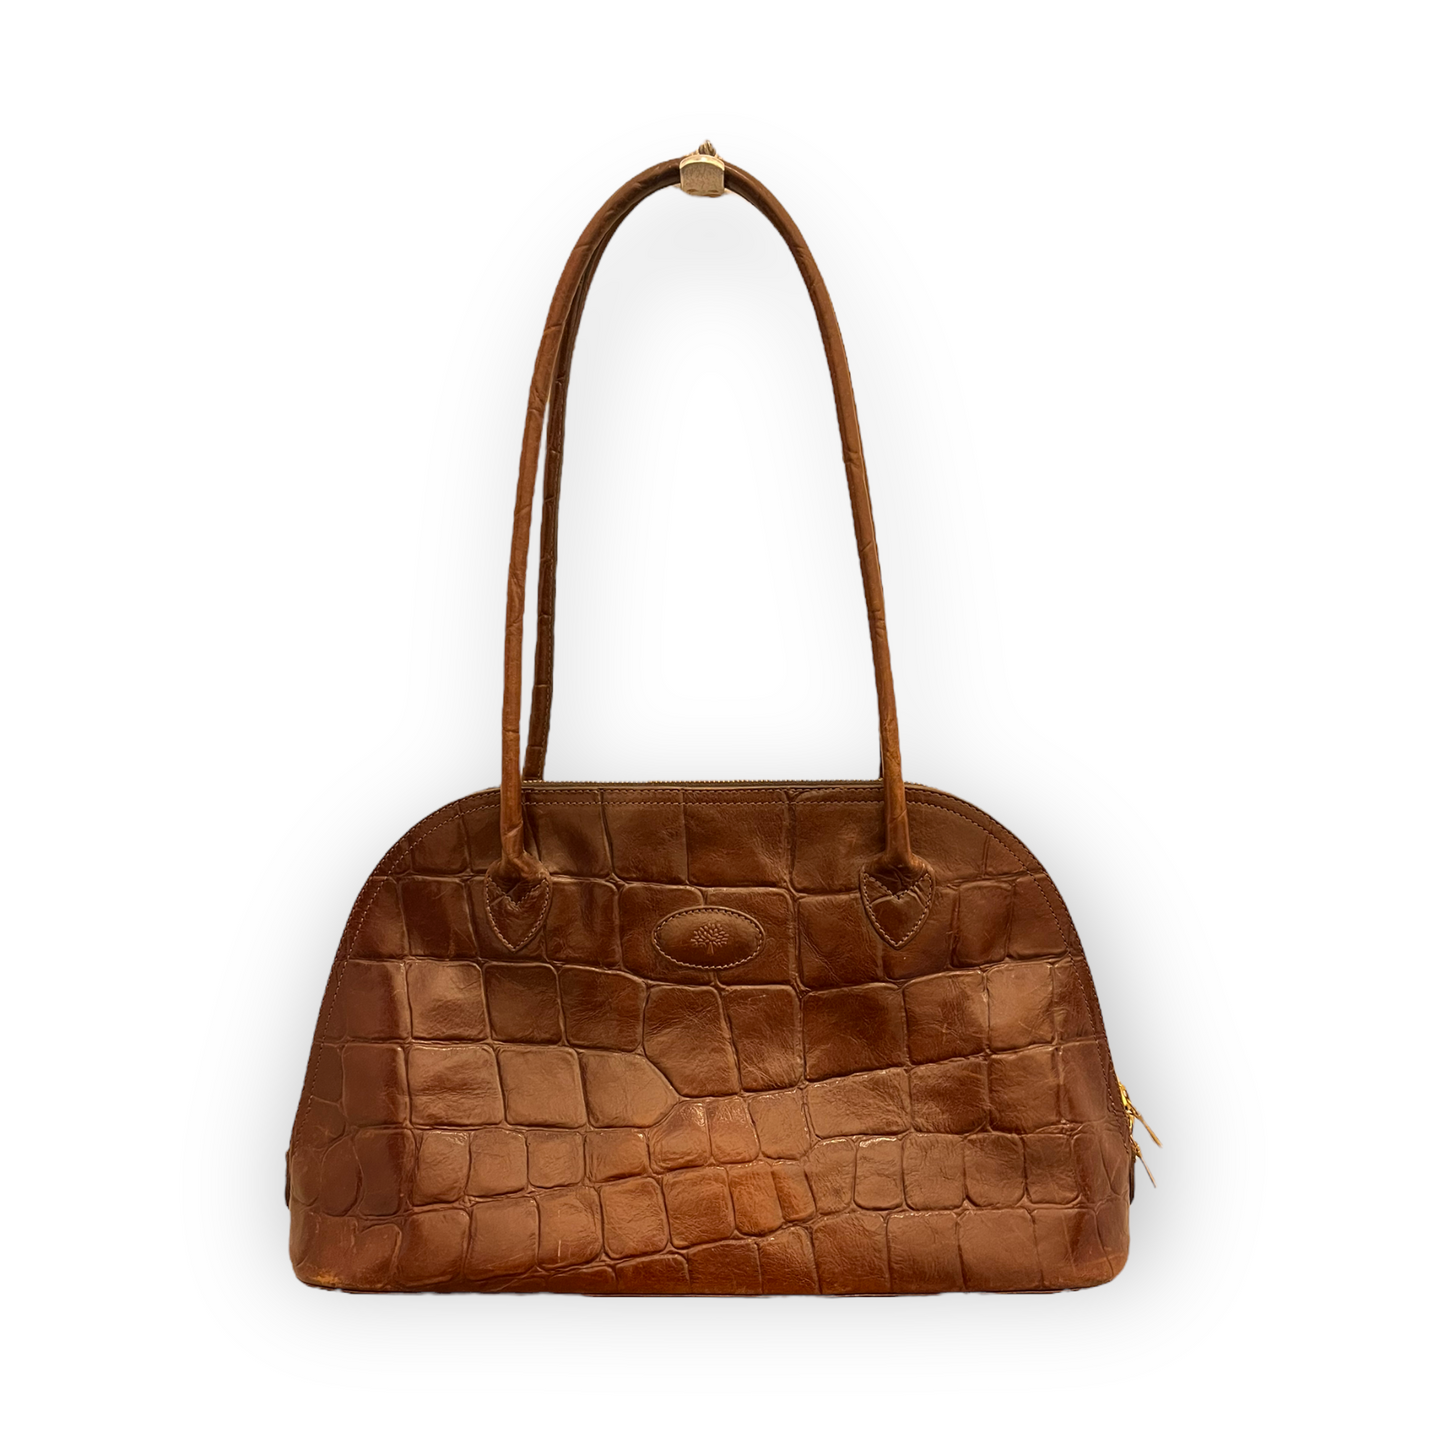 Mulberry Brown Leather Bag